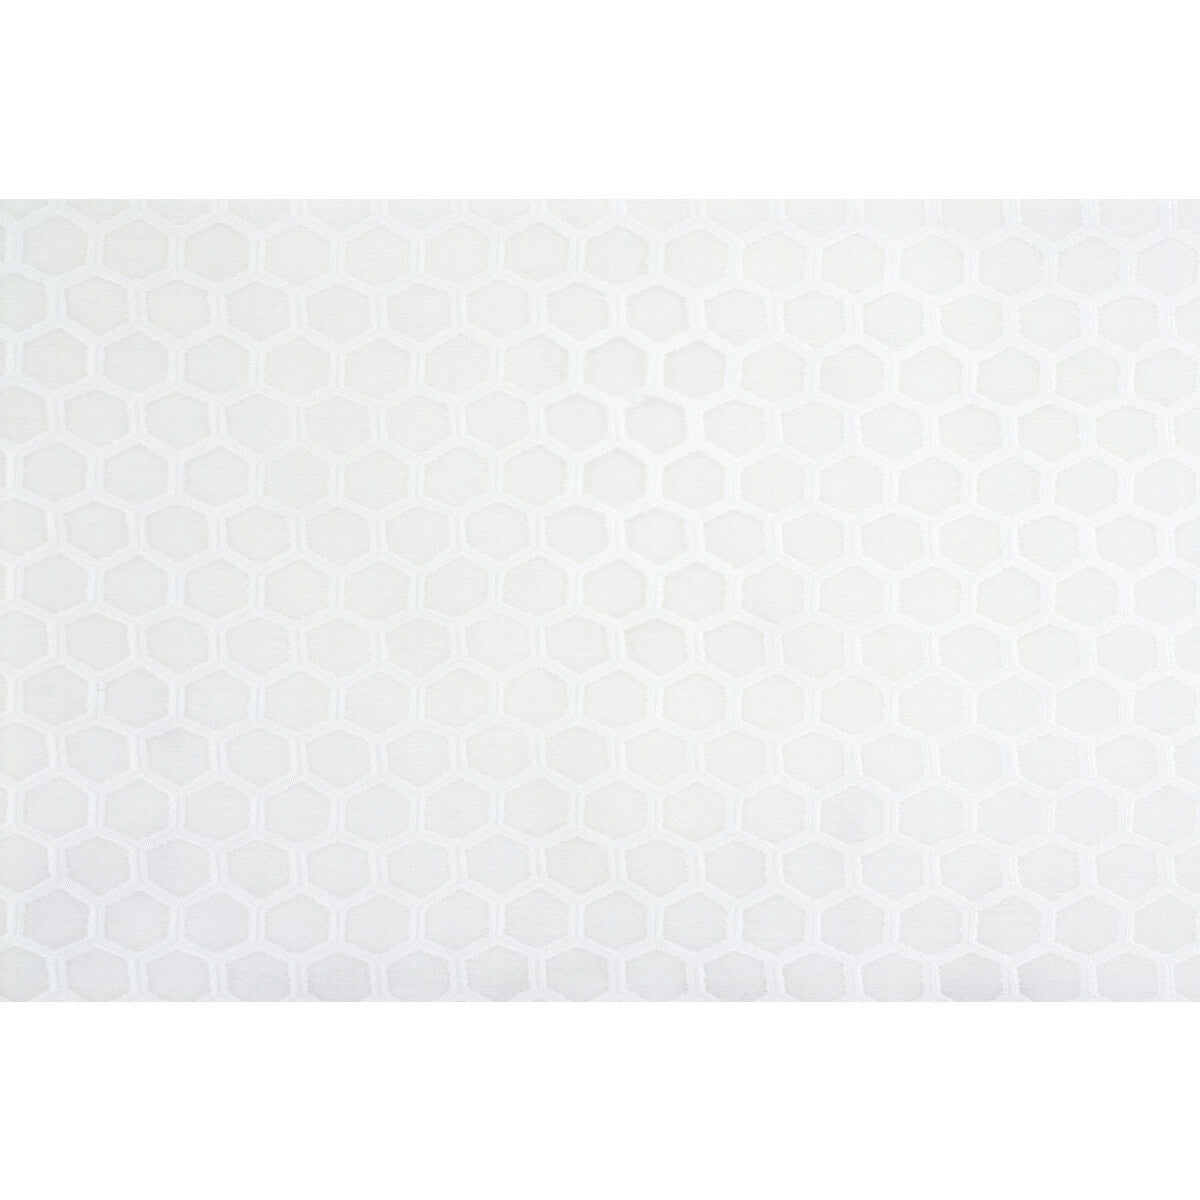 Mila fabric in pearl color - pattern 4284.101.0 - by Kravet Contract